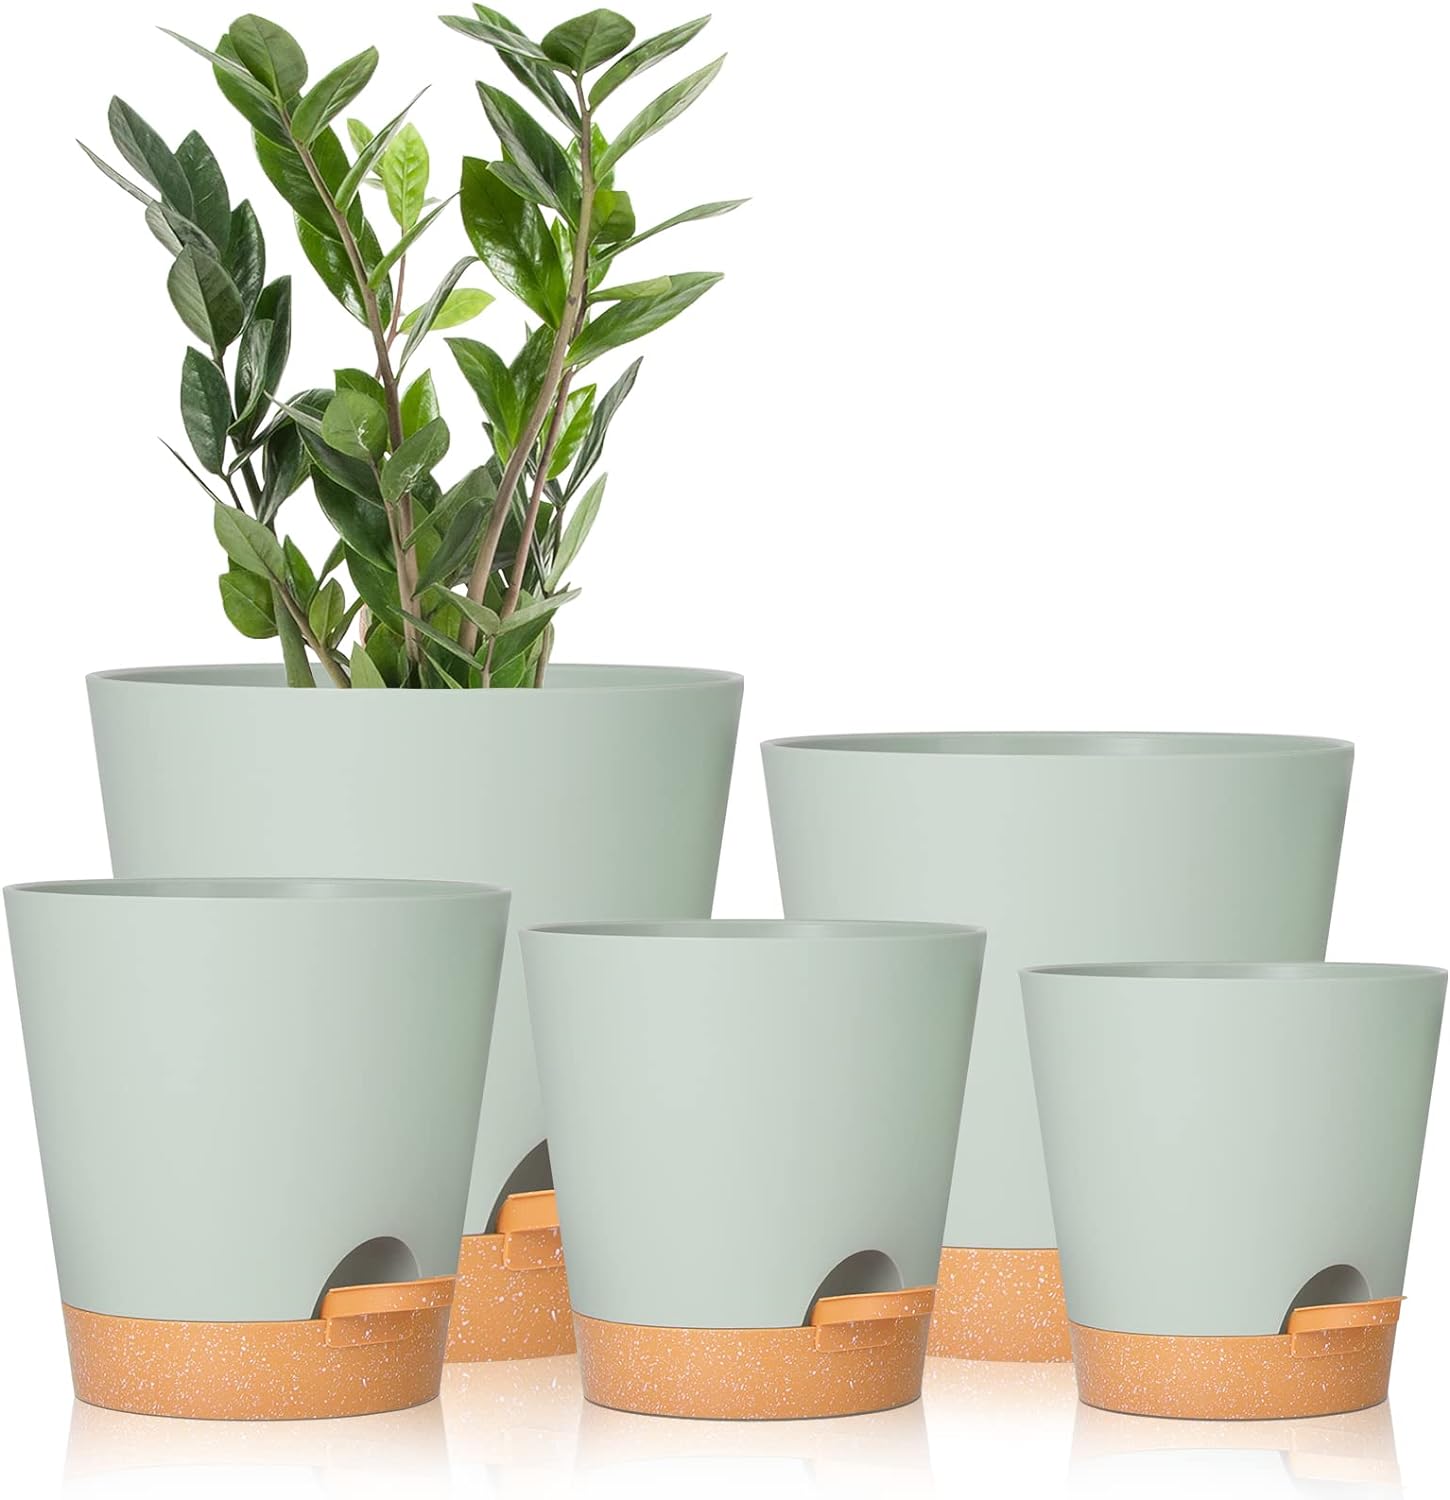 GARDIFE Plant Pots 7/6.5/6/5.5/5 Inch Self Watering Planters with Drainage Hole, Plastic Flower Pots, Nursery Planting Pot for All House Plants, African Violet, Flowers, and Cactus,Green